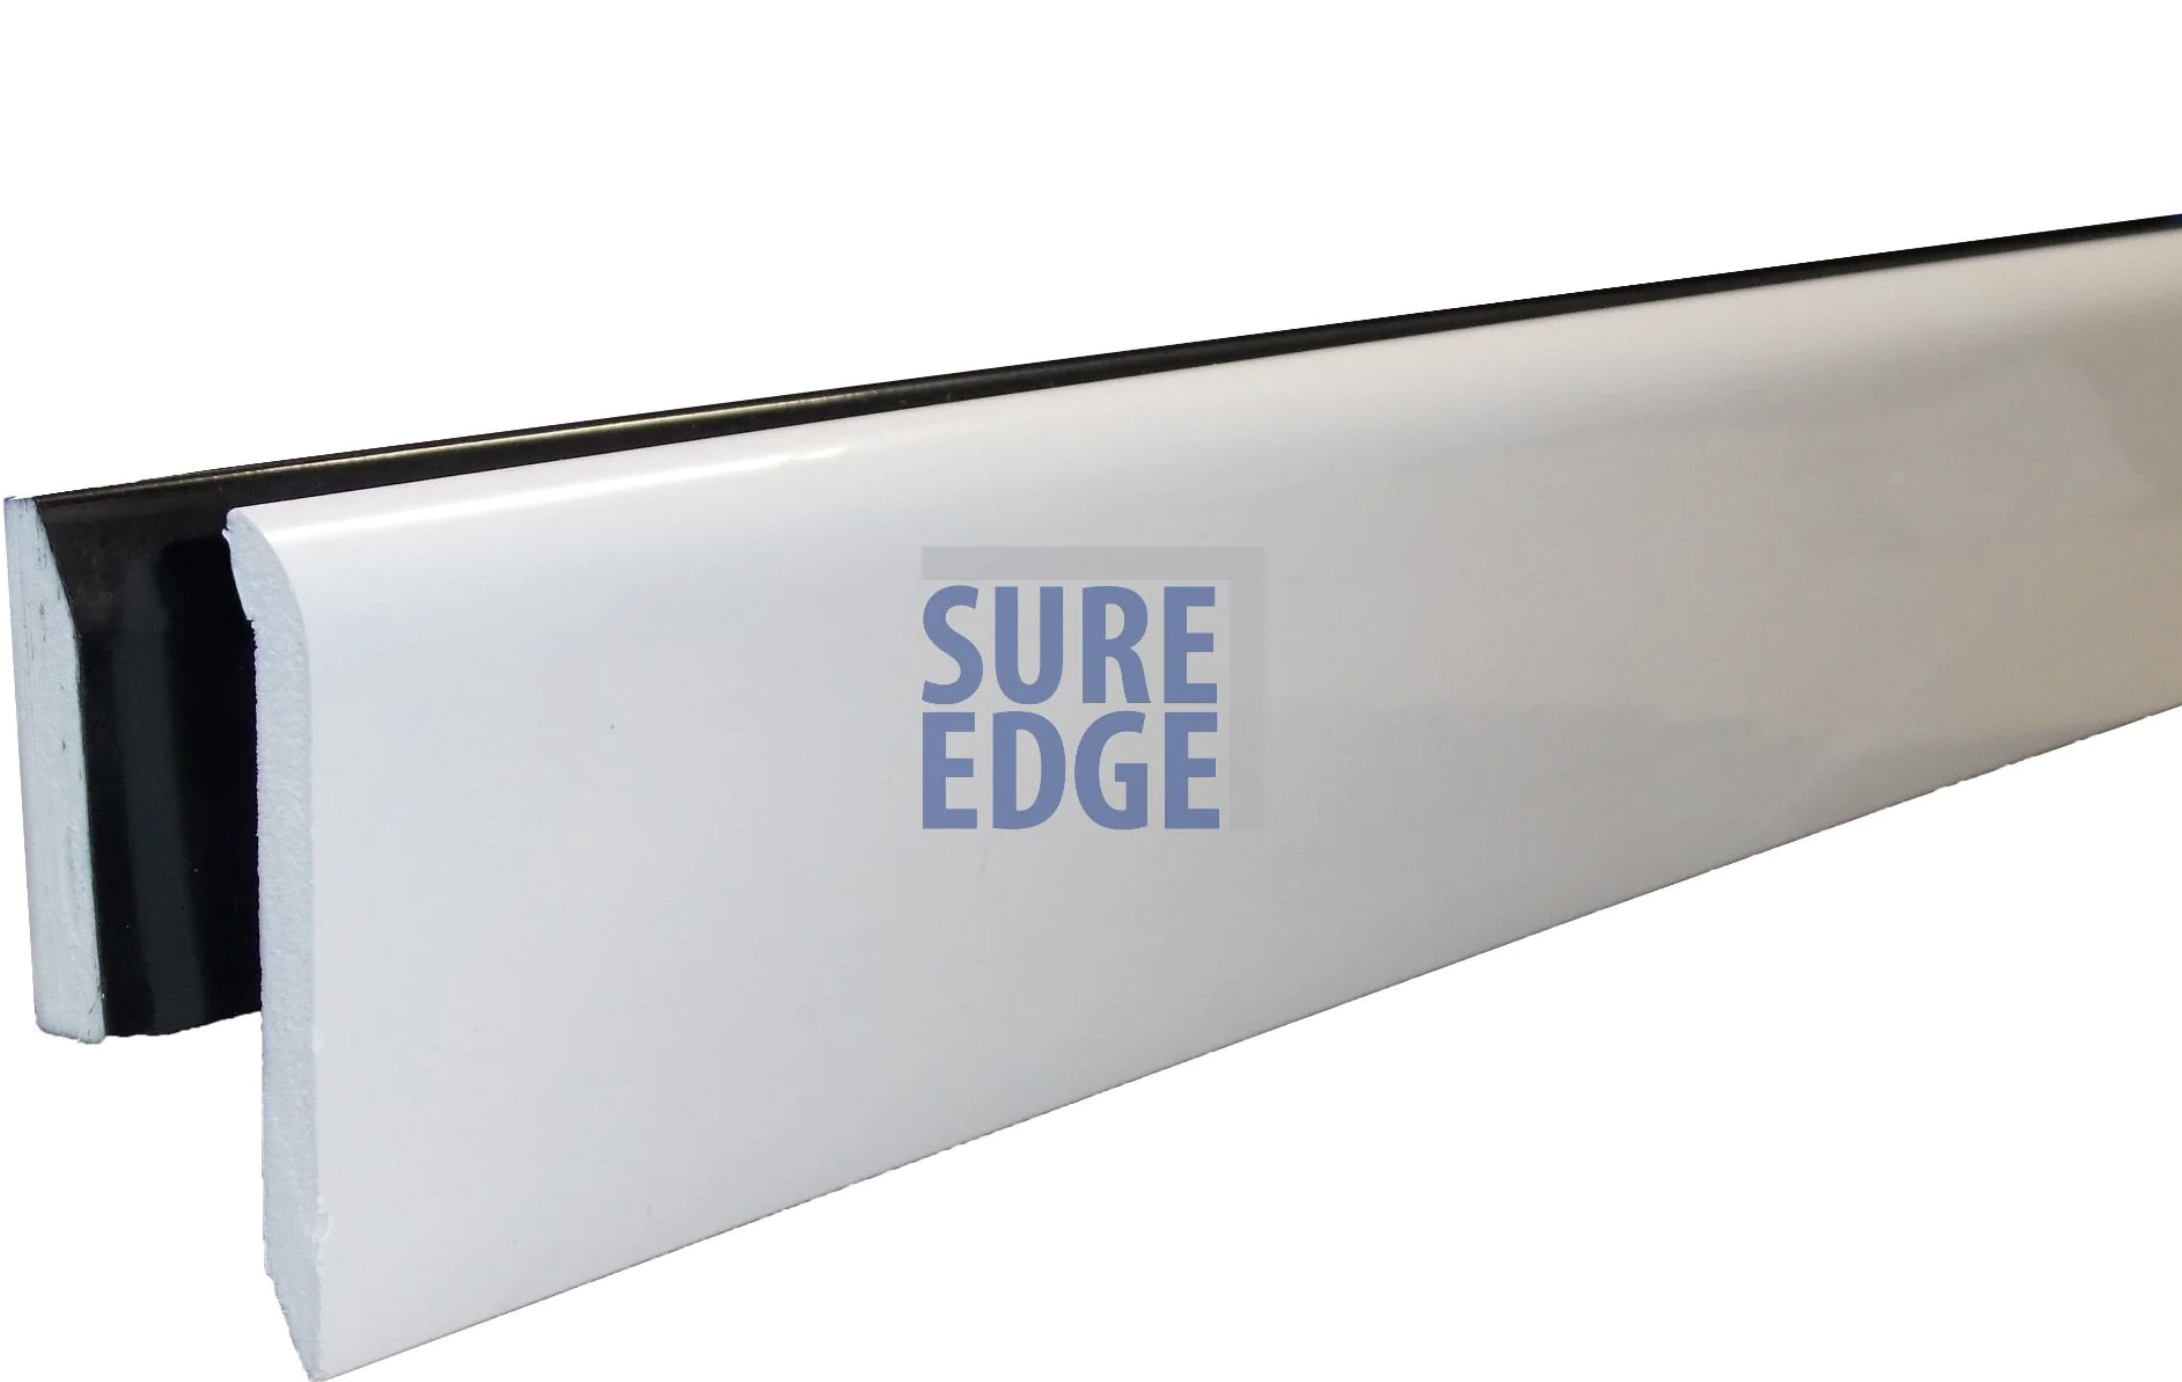 Sure Edge Gutter Drip Trim For EPDM Roofing - 2.5m